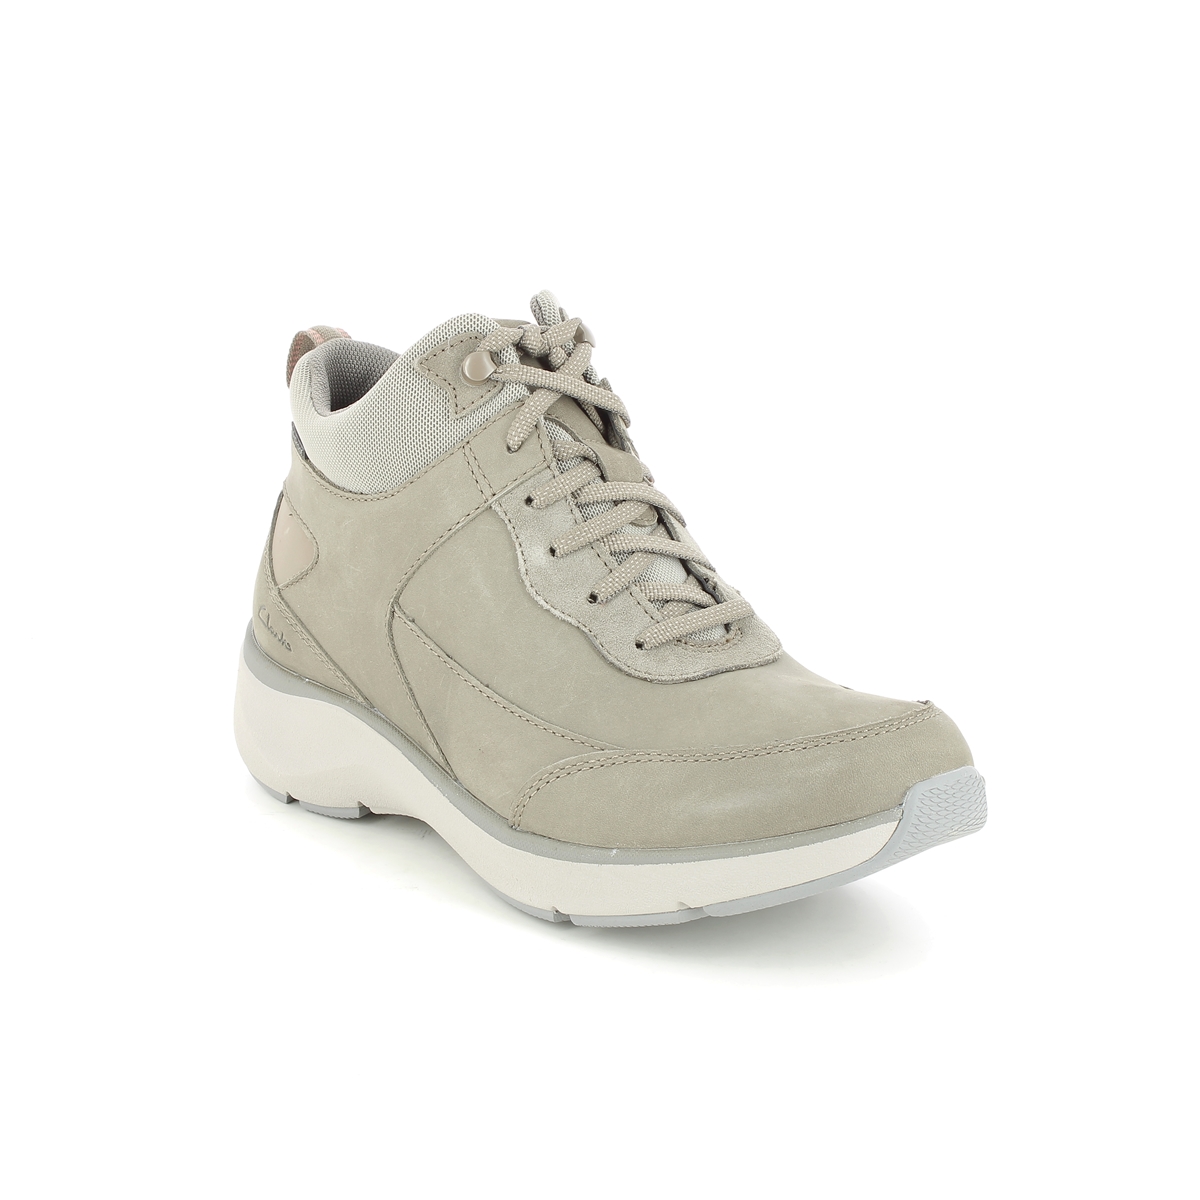 Clarks Wave 2 Mid Tex Taupe Nubuck Womens Walking Boots 536585E In Size 5 In Plain Taupe Nubuck E Width Fitting Narrow Fit